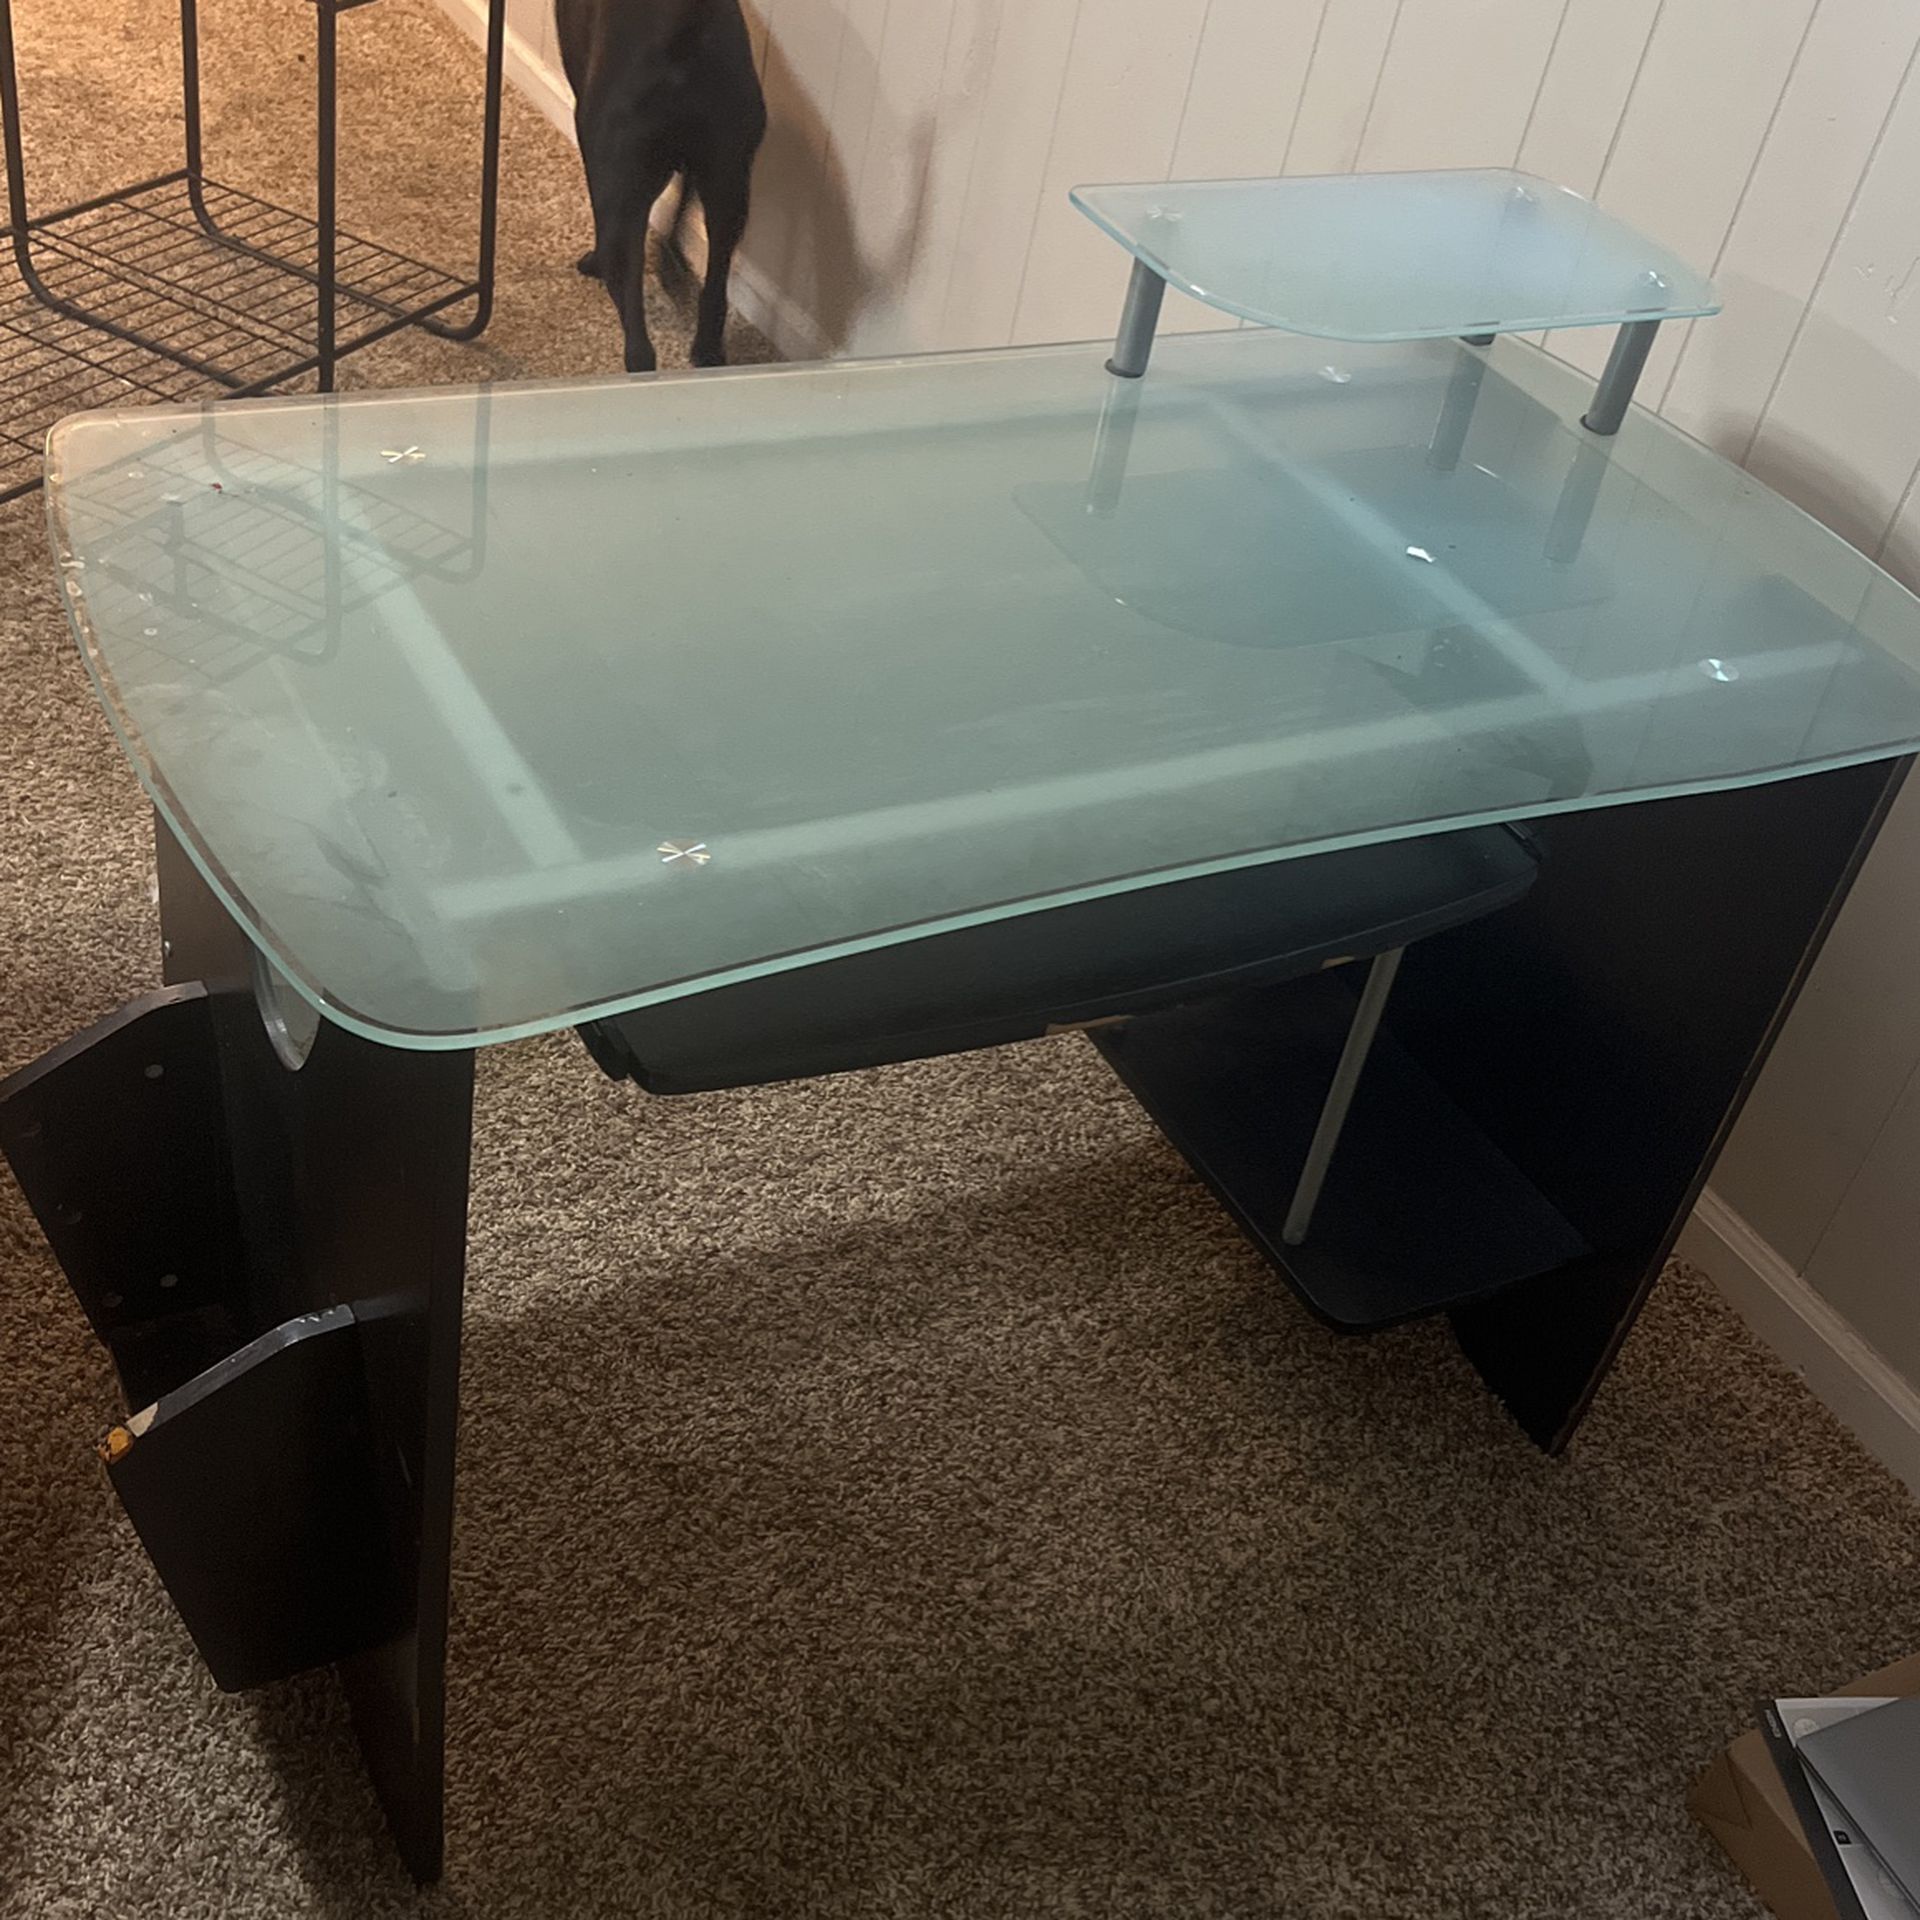 FREE GLASS TOP DESK Pick Up Today Only